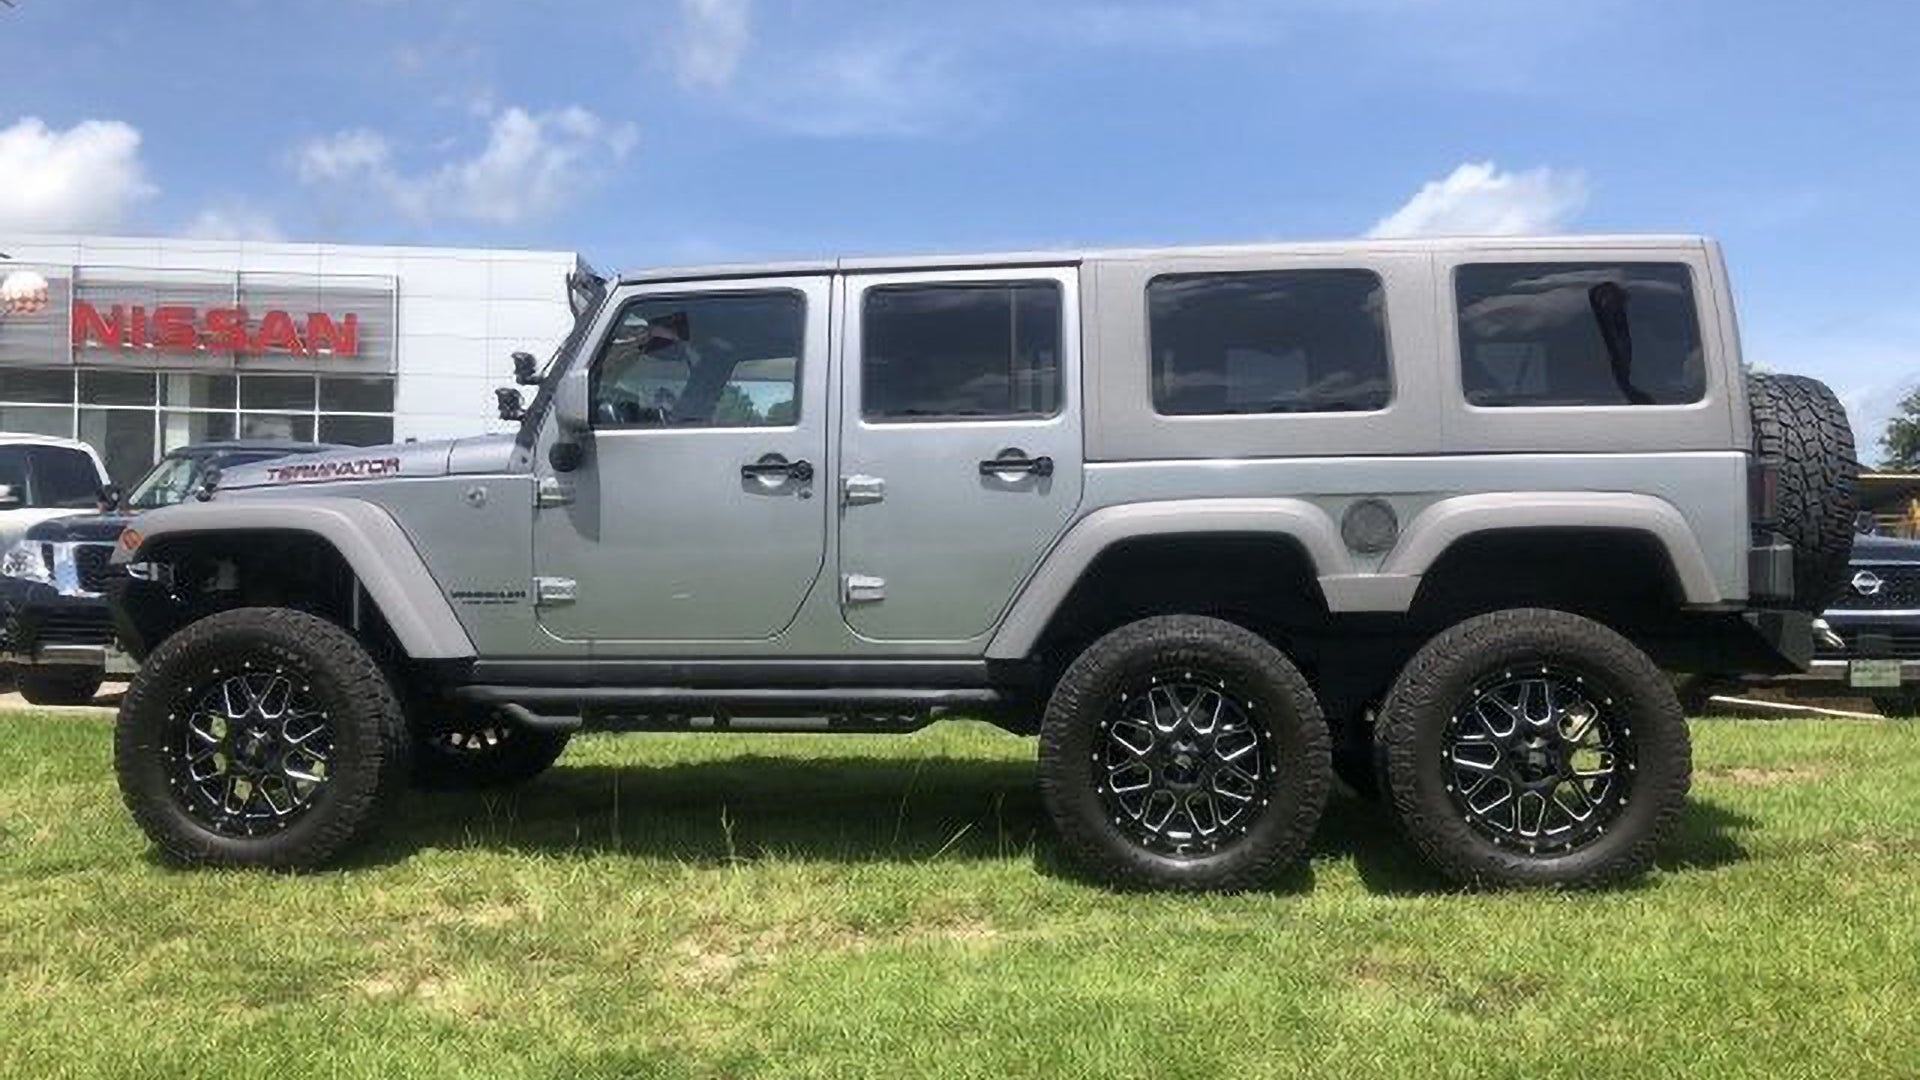 This Jeep Wrangler 6x6 'Terminator' With Questionable Mods Can Be Yours for  $74,955